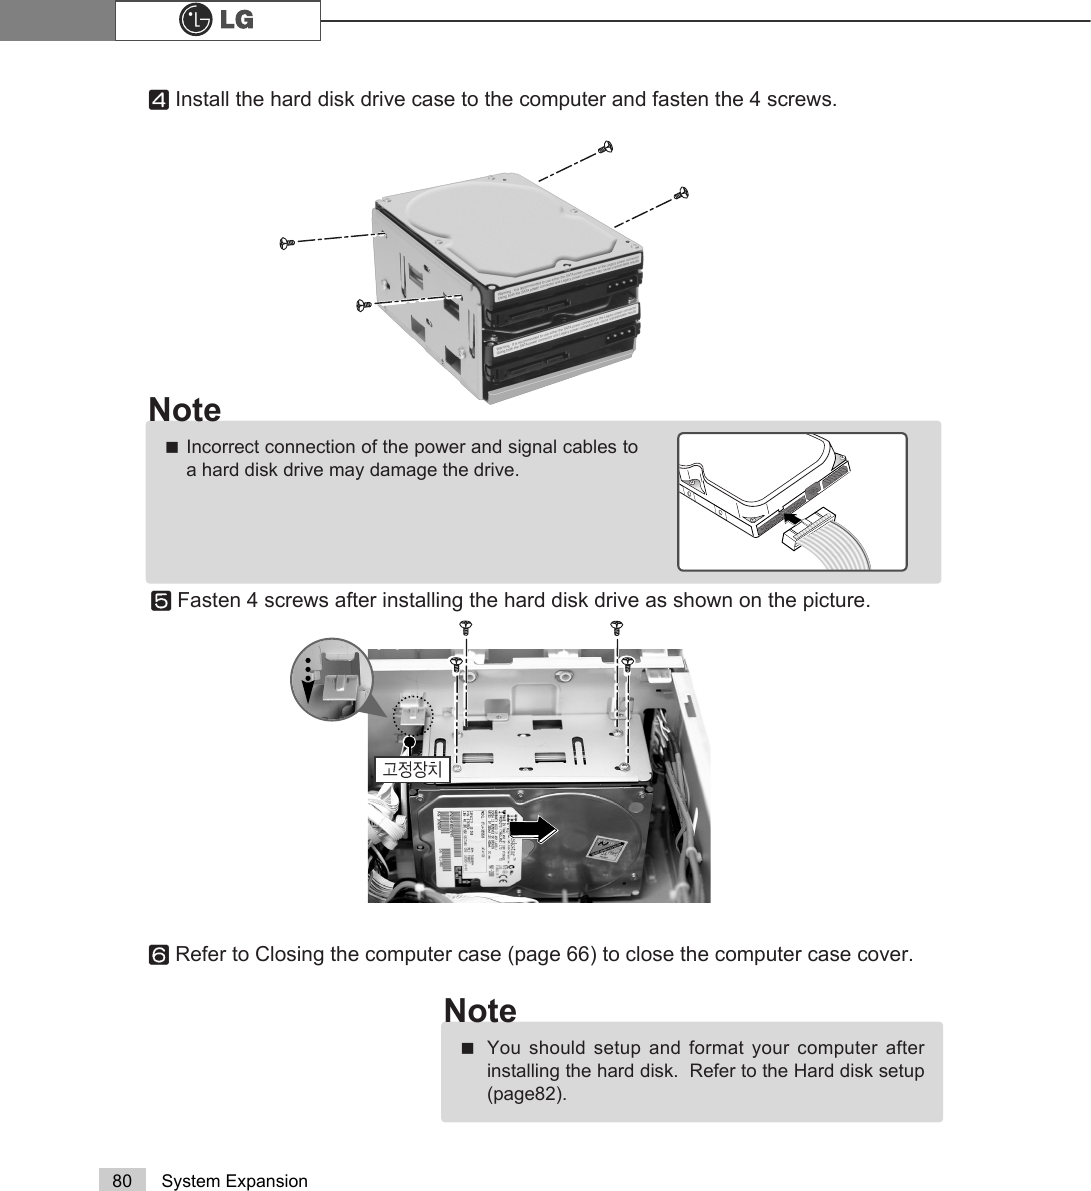 80 System ExpansionⓣRefer to Closing the computer case (page 66) to close the computer case cover.ⓢFasten 4 screws after installing the hard disk drive as shown on the picture.ãYou should setup and format your computer afterinstalling the hard disk.  Refer to the Hard disk setup(page82). NoteӋીણௗⓡInstall the hard disk drive case to the computer and fasten the 4 screws.ãIncorrect connection of the power and signal cables toa hard disk drive may damage the drive.Note